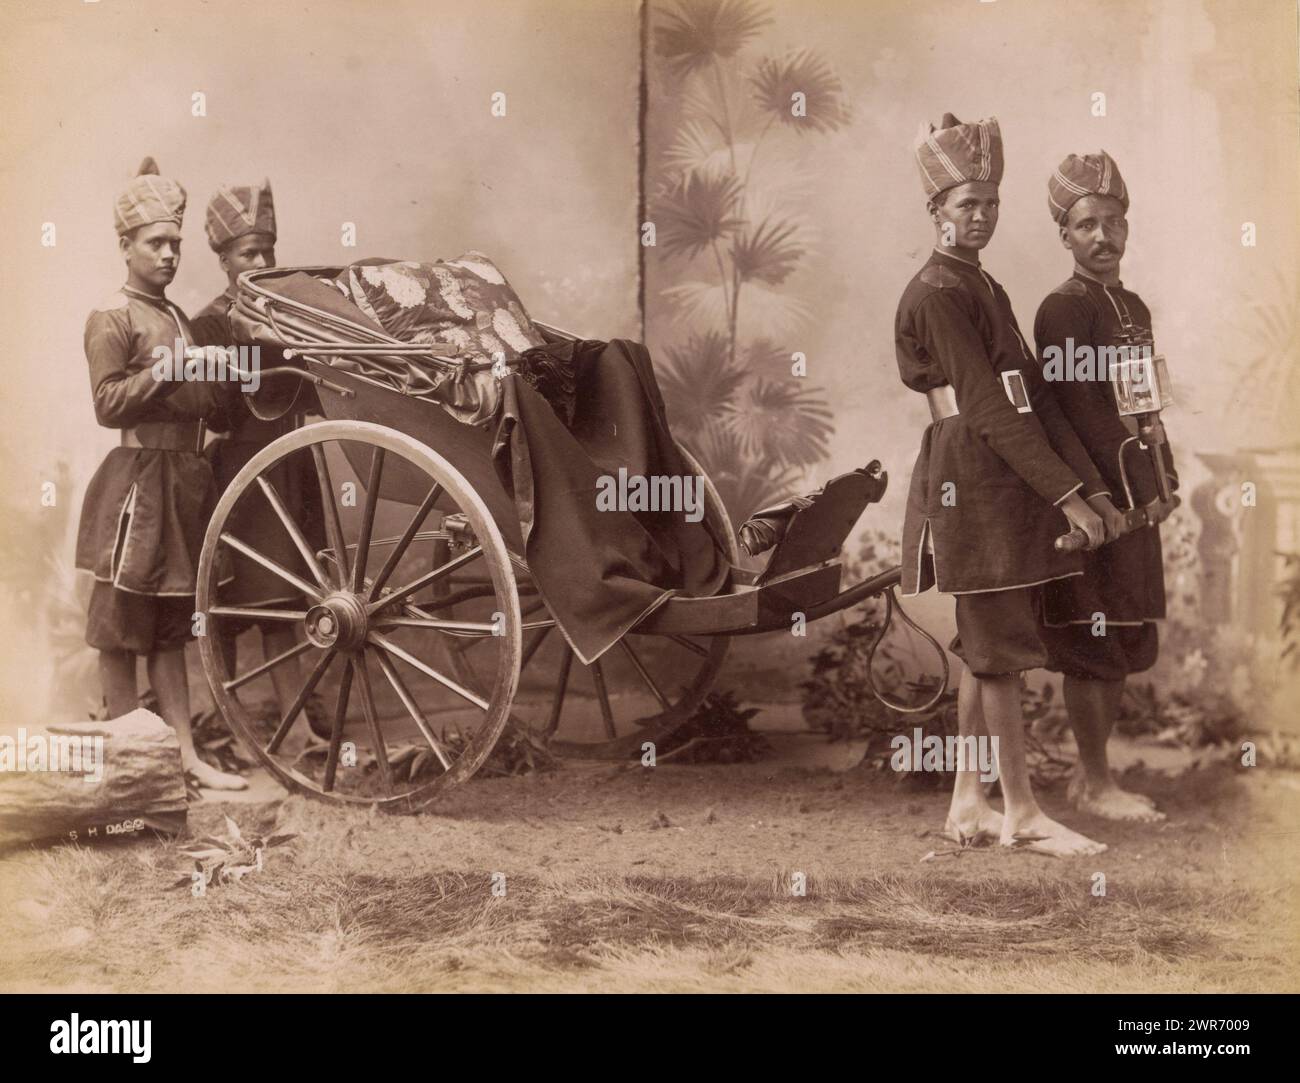 Studio portrait of four Indian men in uniform with a carriage, India, Sidney Herbert Dagg, Brits-Indië, 1890 - 1910, paper, albumen print, height 213 mm × width 275 mm, height 227 mm × width 293 mm, photograph Stock Photo